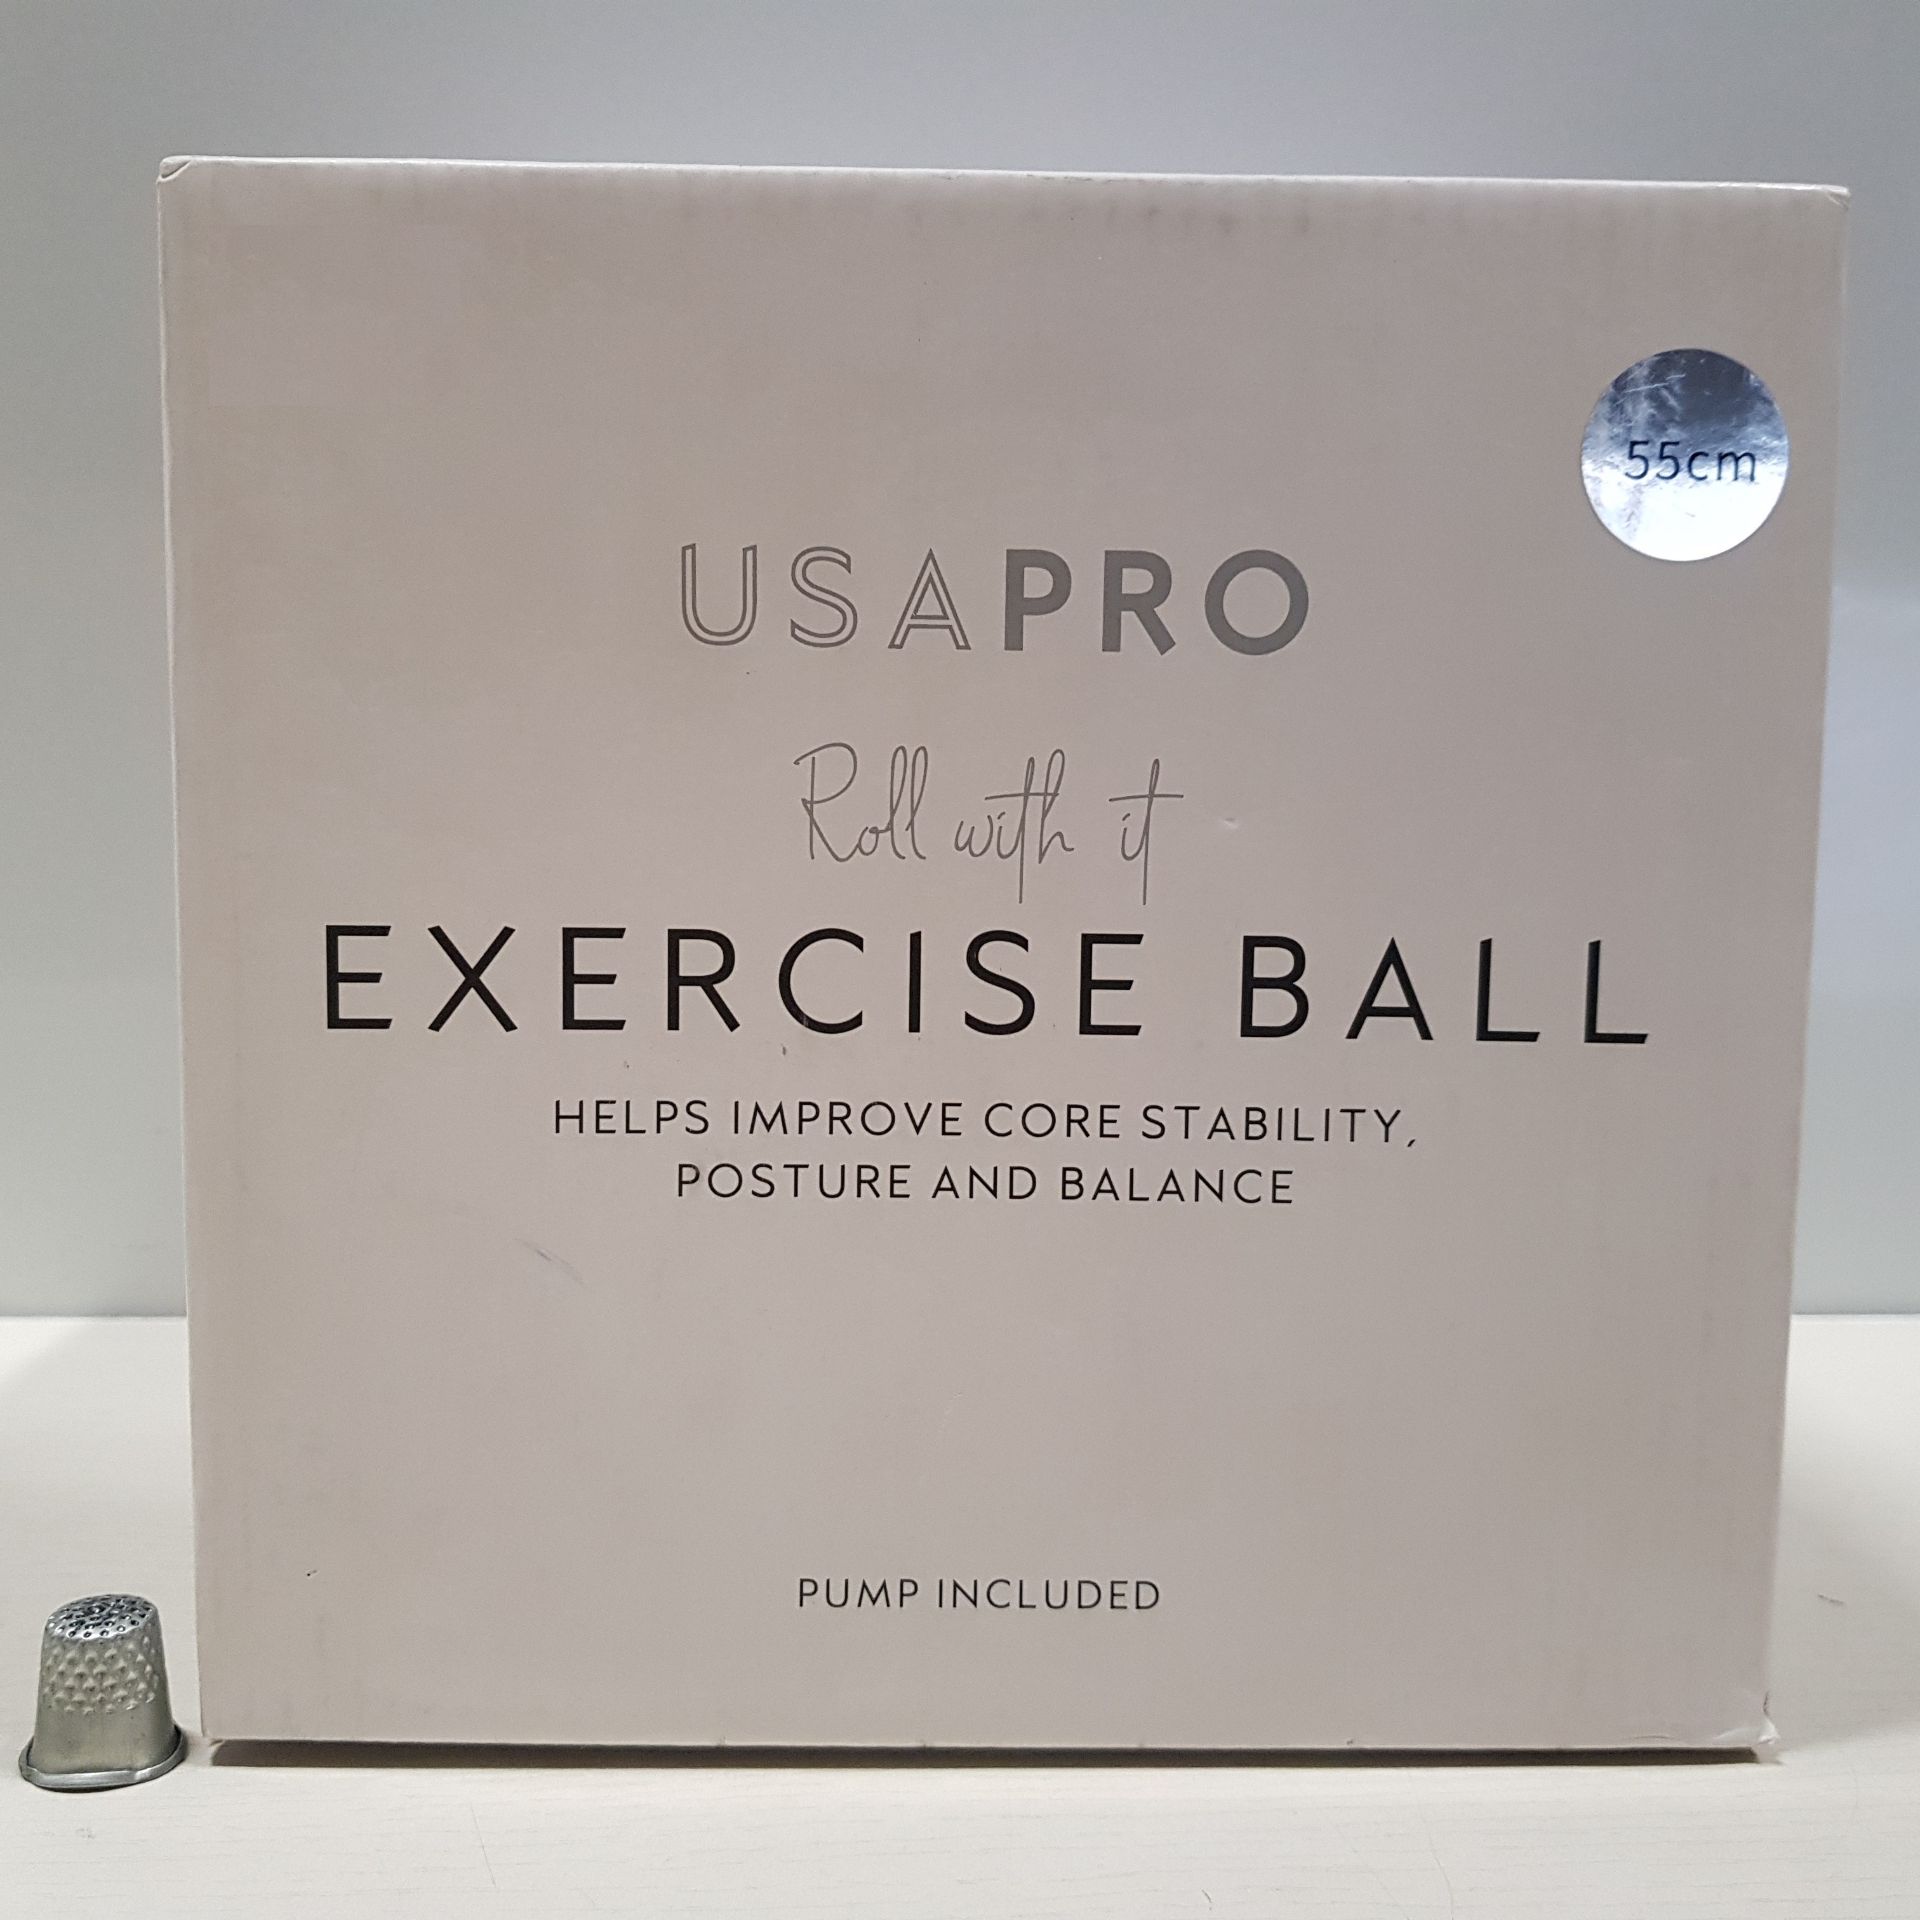 24 X BRAND NEW USA PRO EXERCISE BALL SIZE 55CM WITH PUMP INCLUDED - IN 2 BOXES